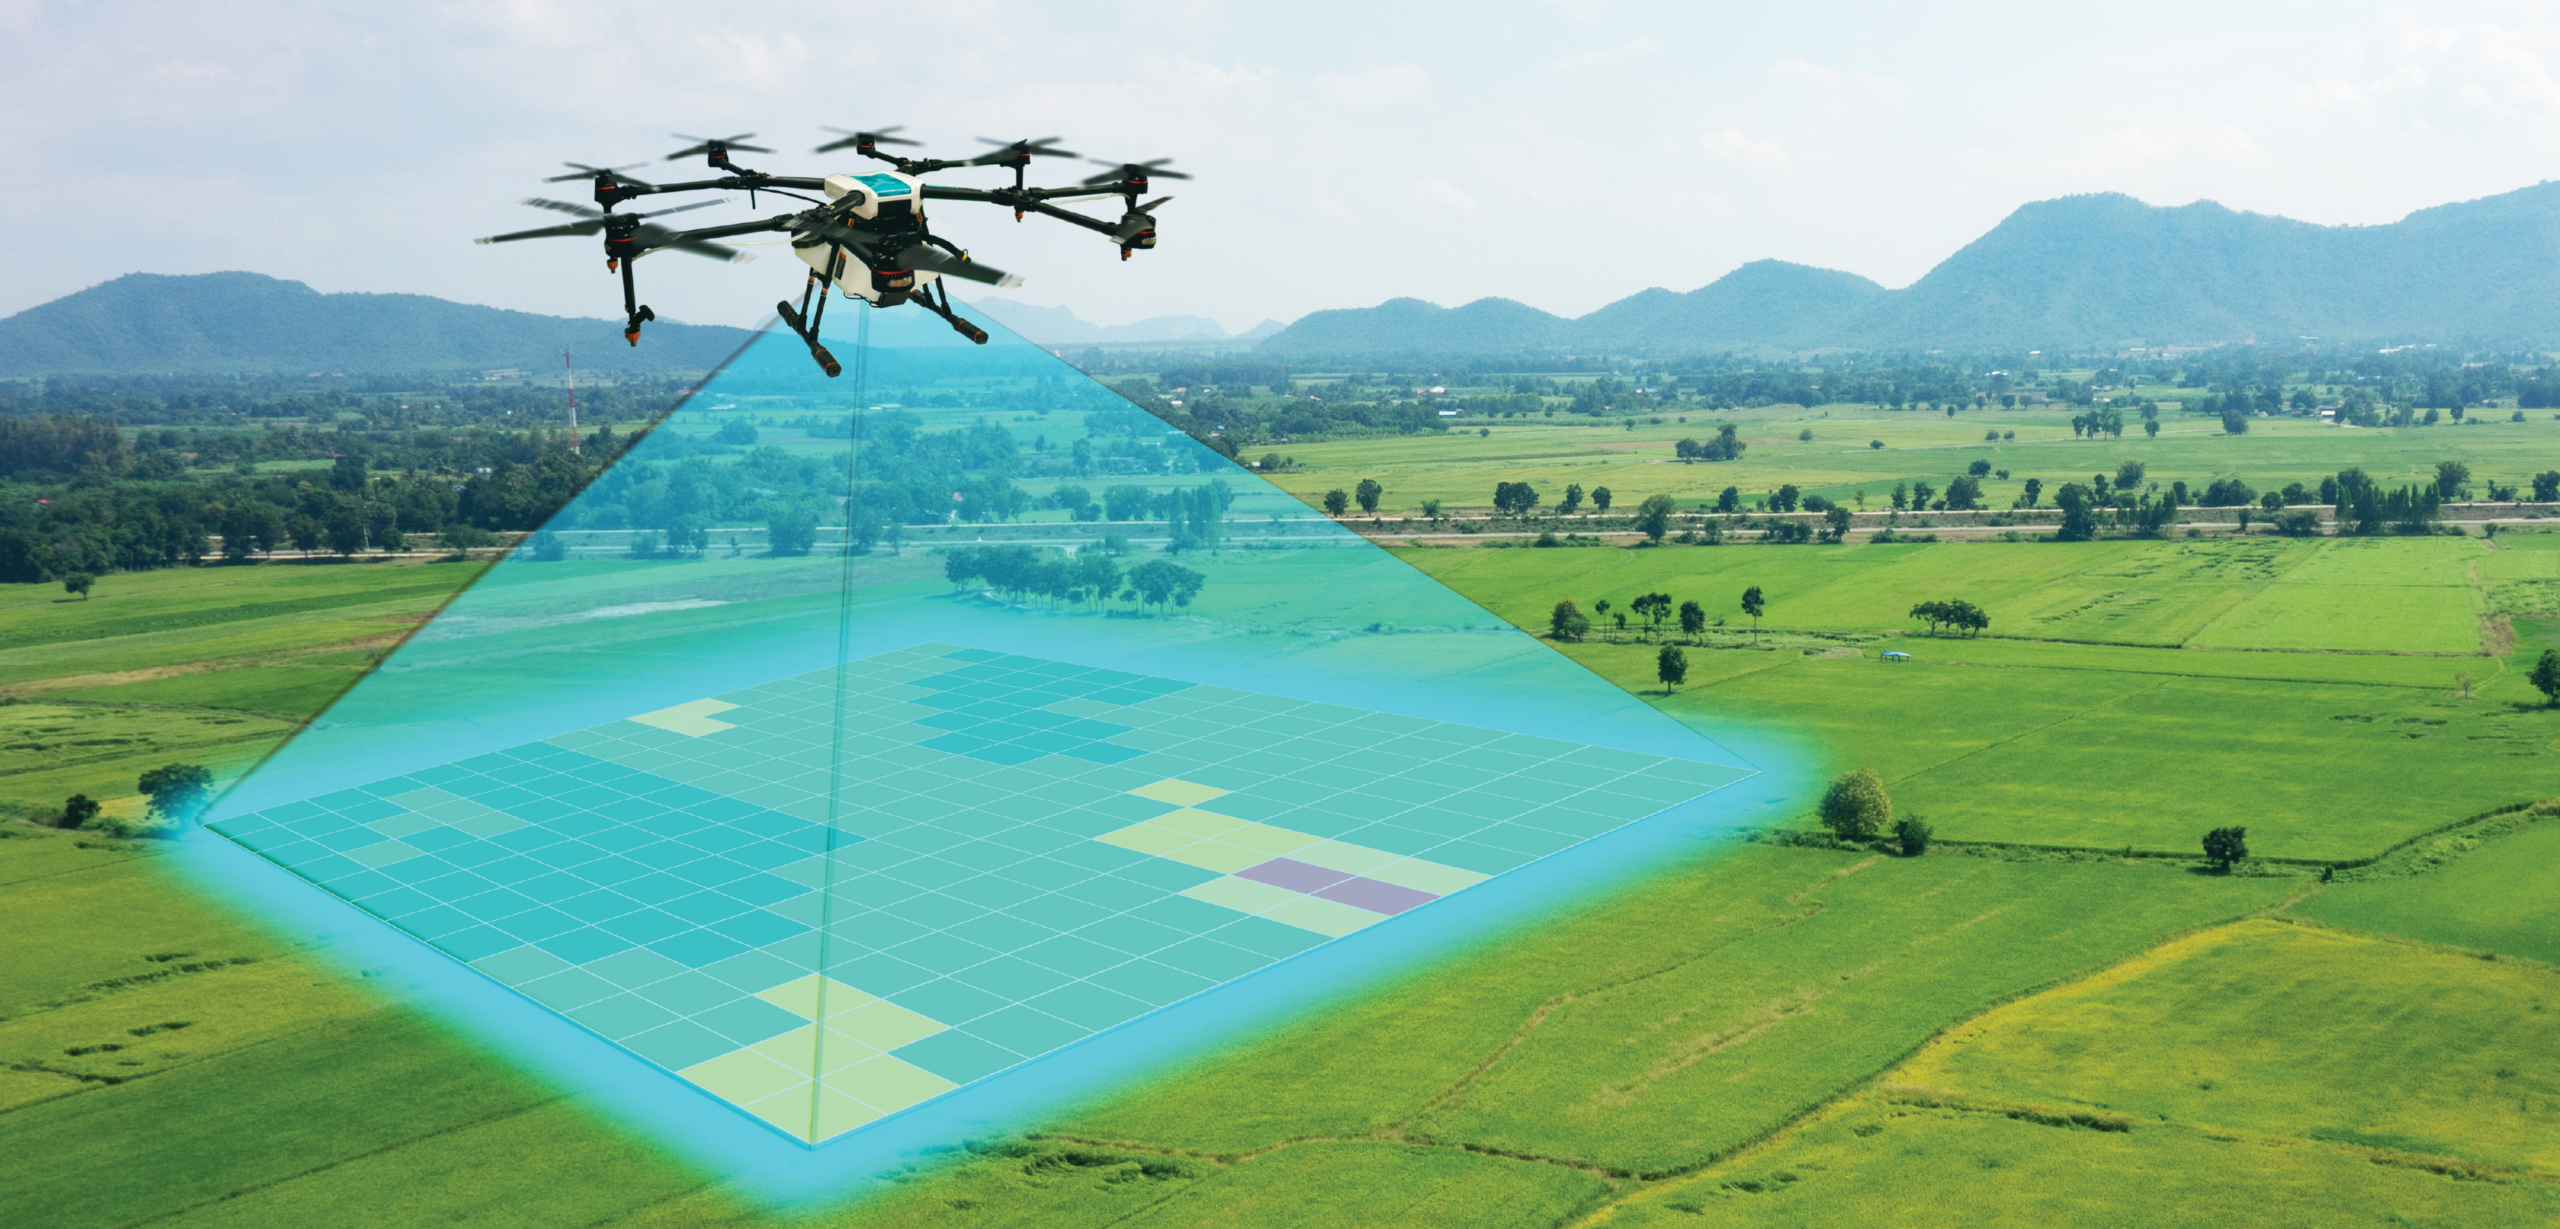 A drone flies over a landscape mapping a square section of grass.